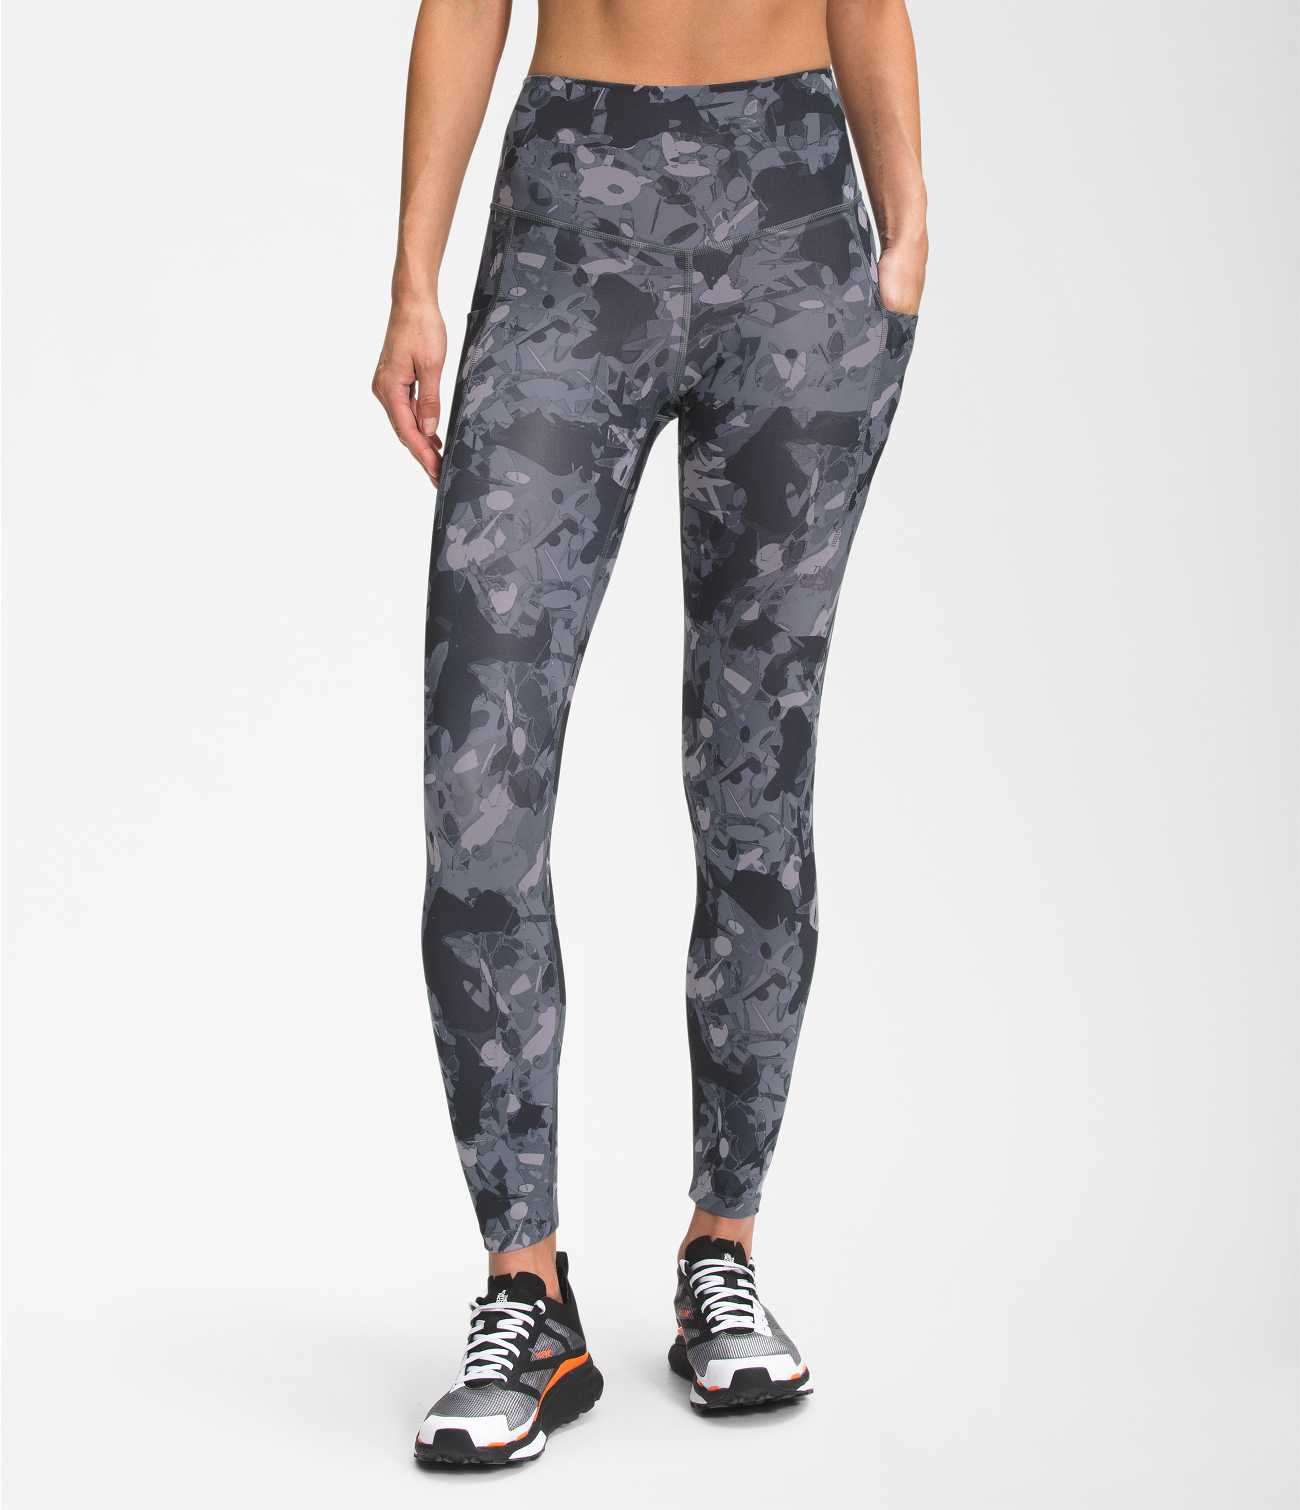 WOMEN'S PRINTED MOTIVATION HIGH-RISE 7/8 POCKET TIGHT, The North Face